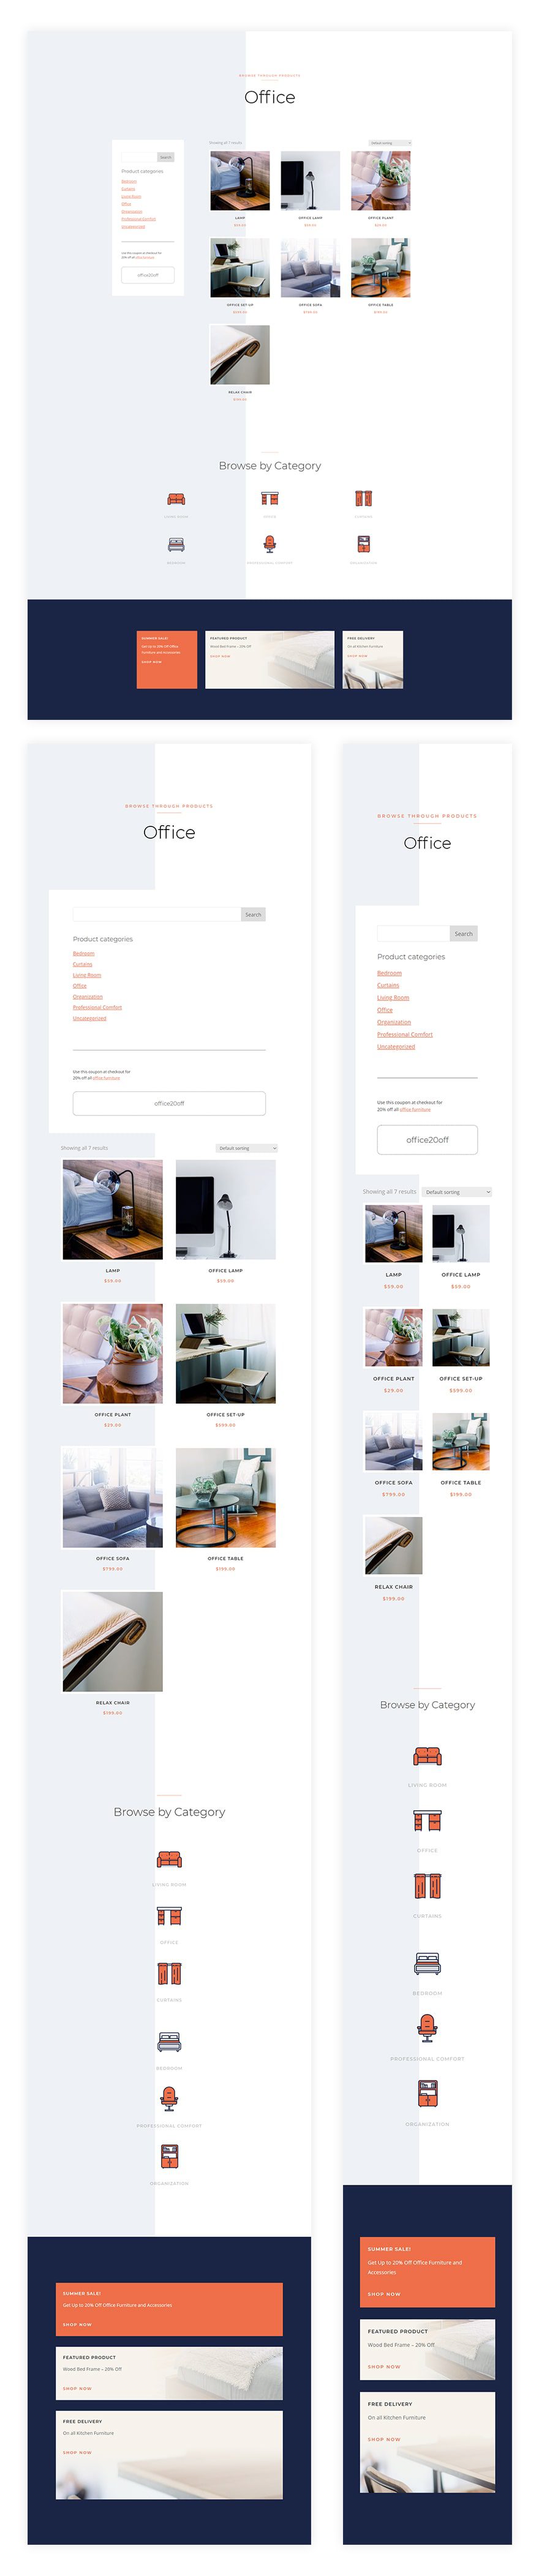 furniture store product category page template